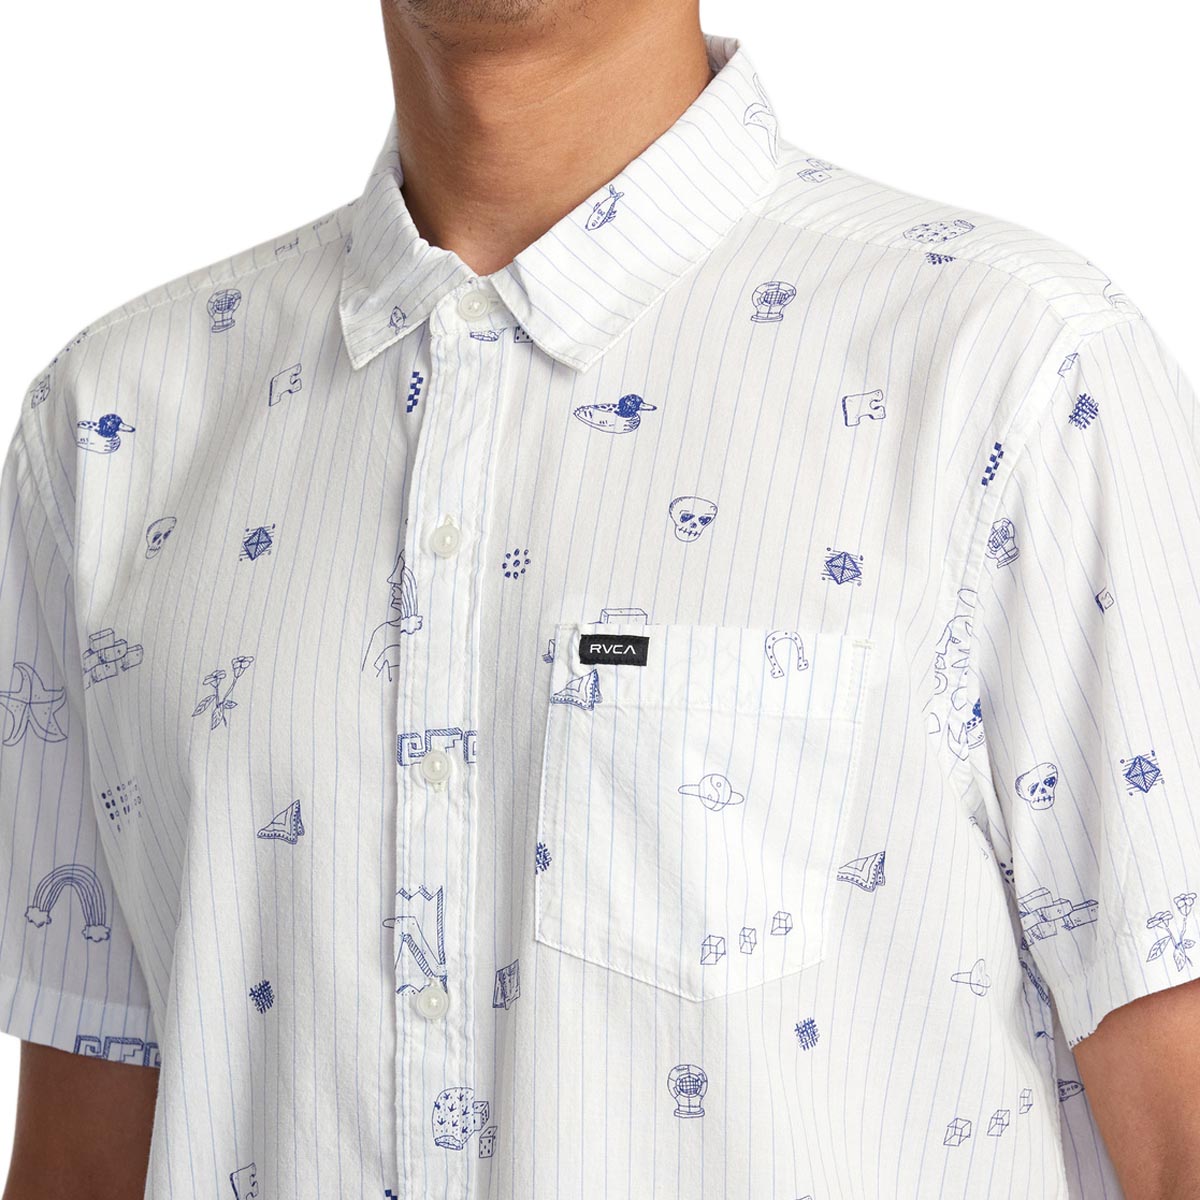 RVCA College Ruled Shirt - Antique White image 3